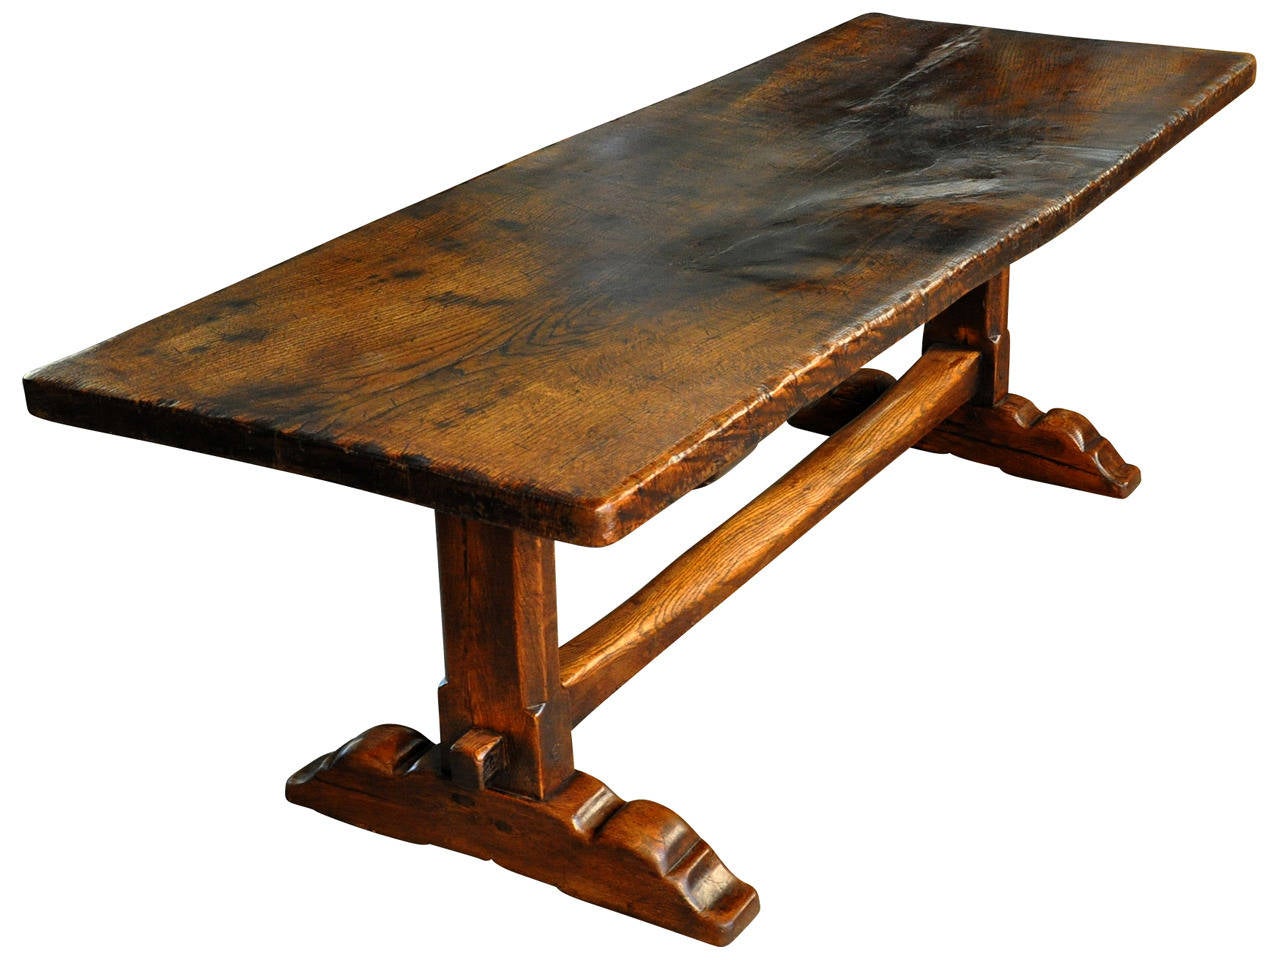 A very handsome 19th century French Farm Table - Trestle Table in chestnut.  The top is a solid board.  This wonderful table has a very deep and rich patina.  Wonderful not only as a dining table, but as a writing table or sofa table as well.